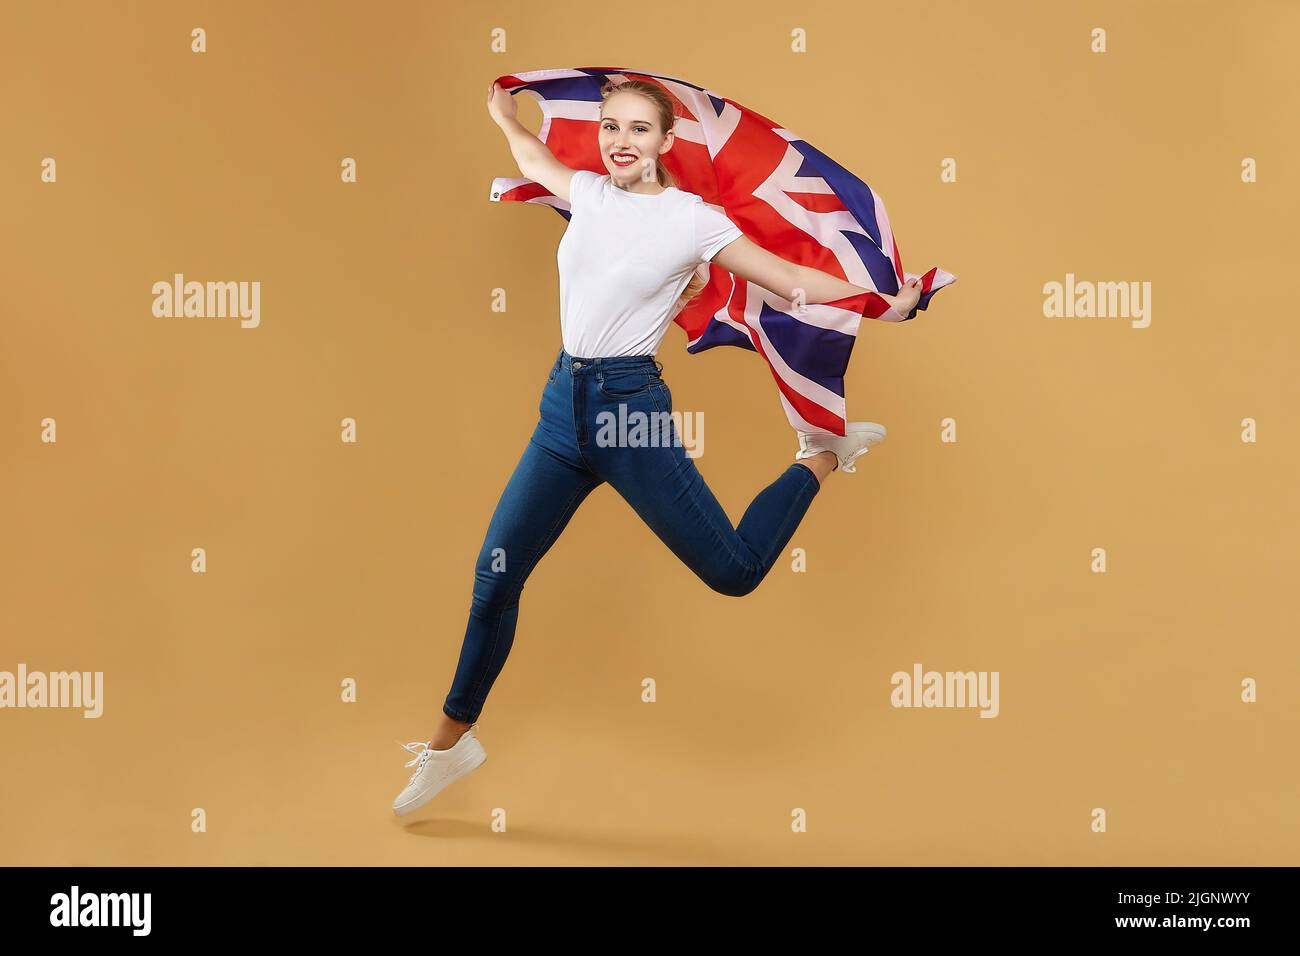 attractive blonde made a jump with a British flag. photo shoot in the studio with a yellow background. Stock Photo